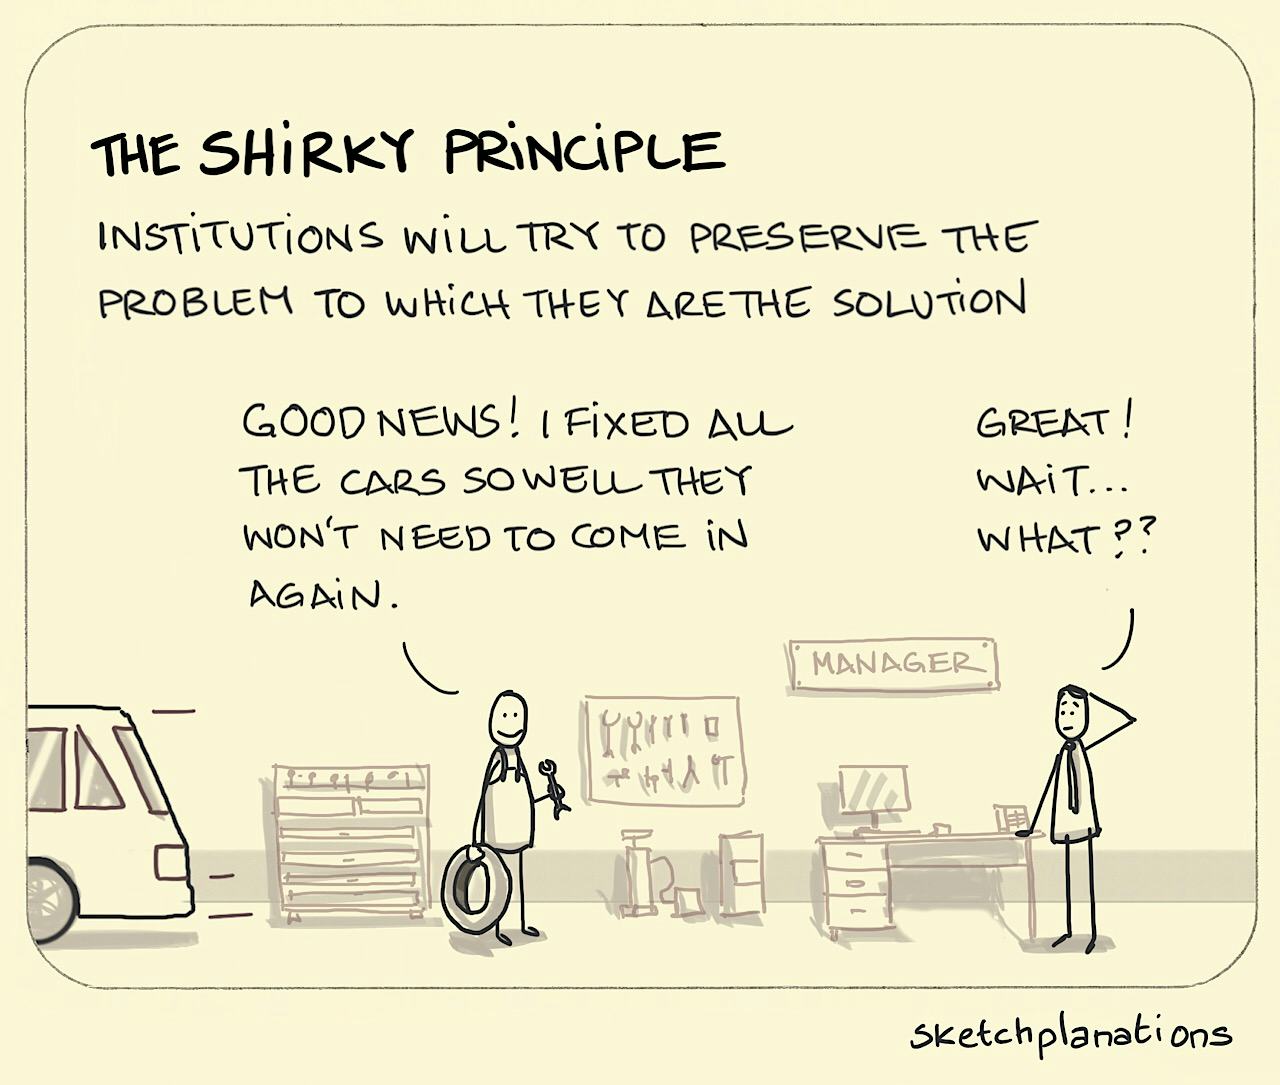 The Shirky principle — from Clay Shirky — illustration in a garage where a manager is astonished by a mechanic fixing the cars so they'll never need to come back